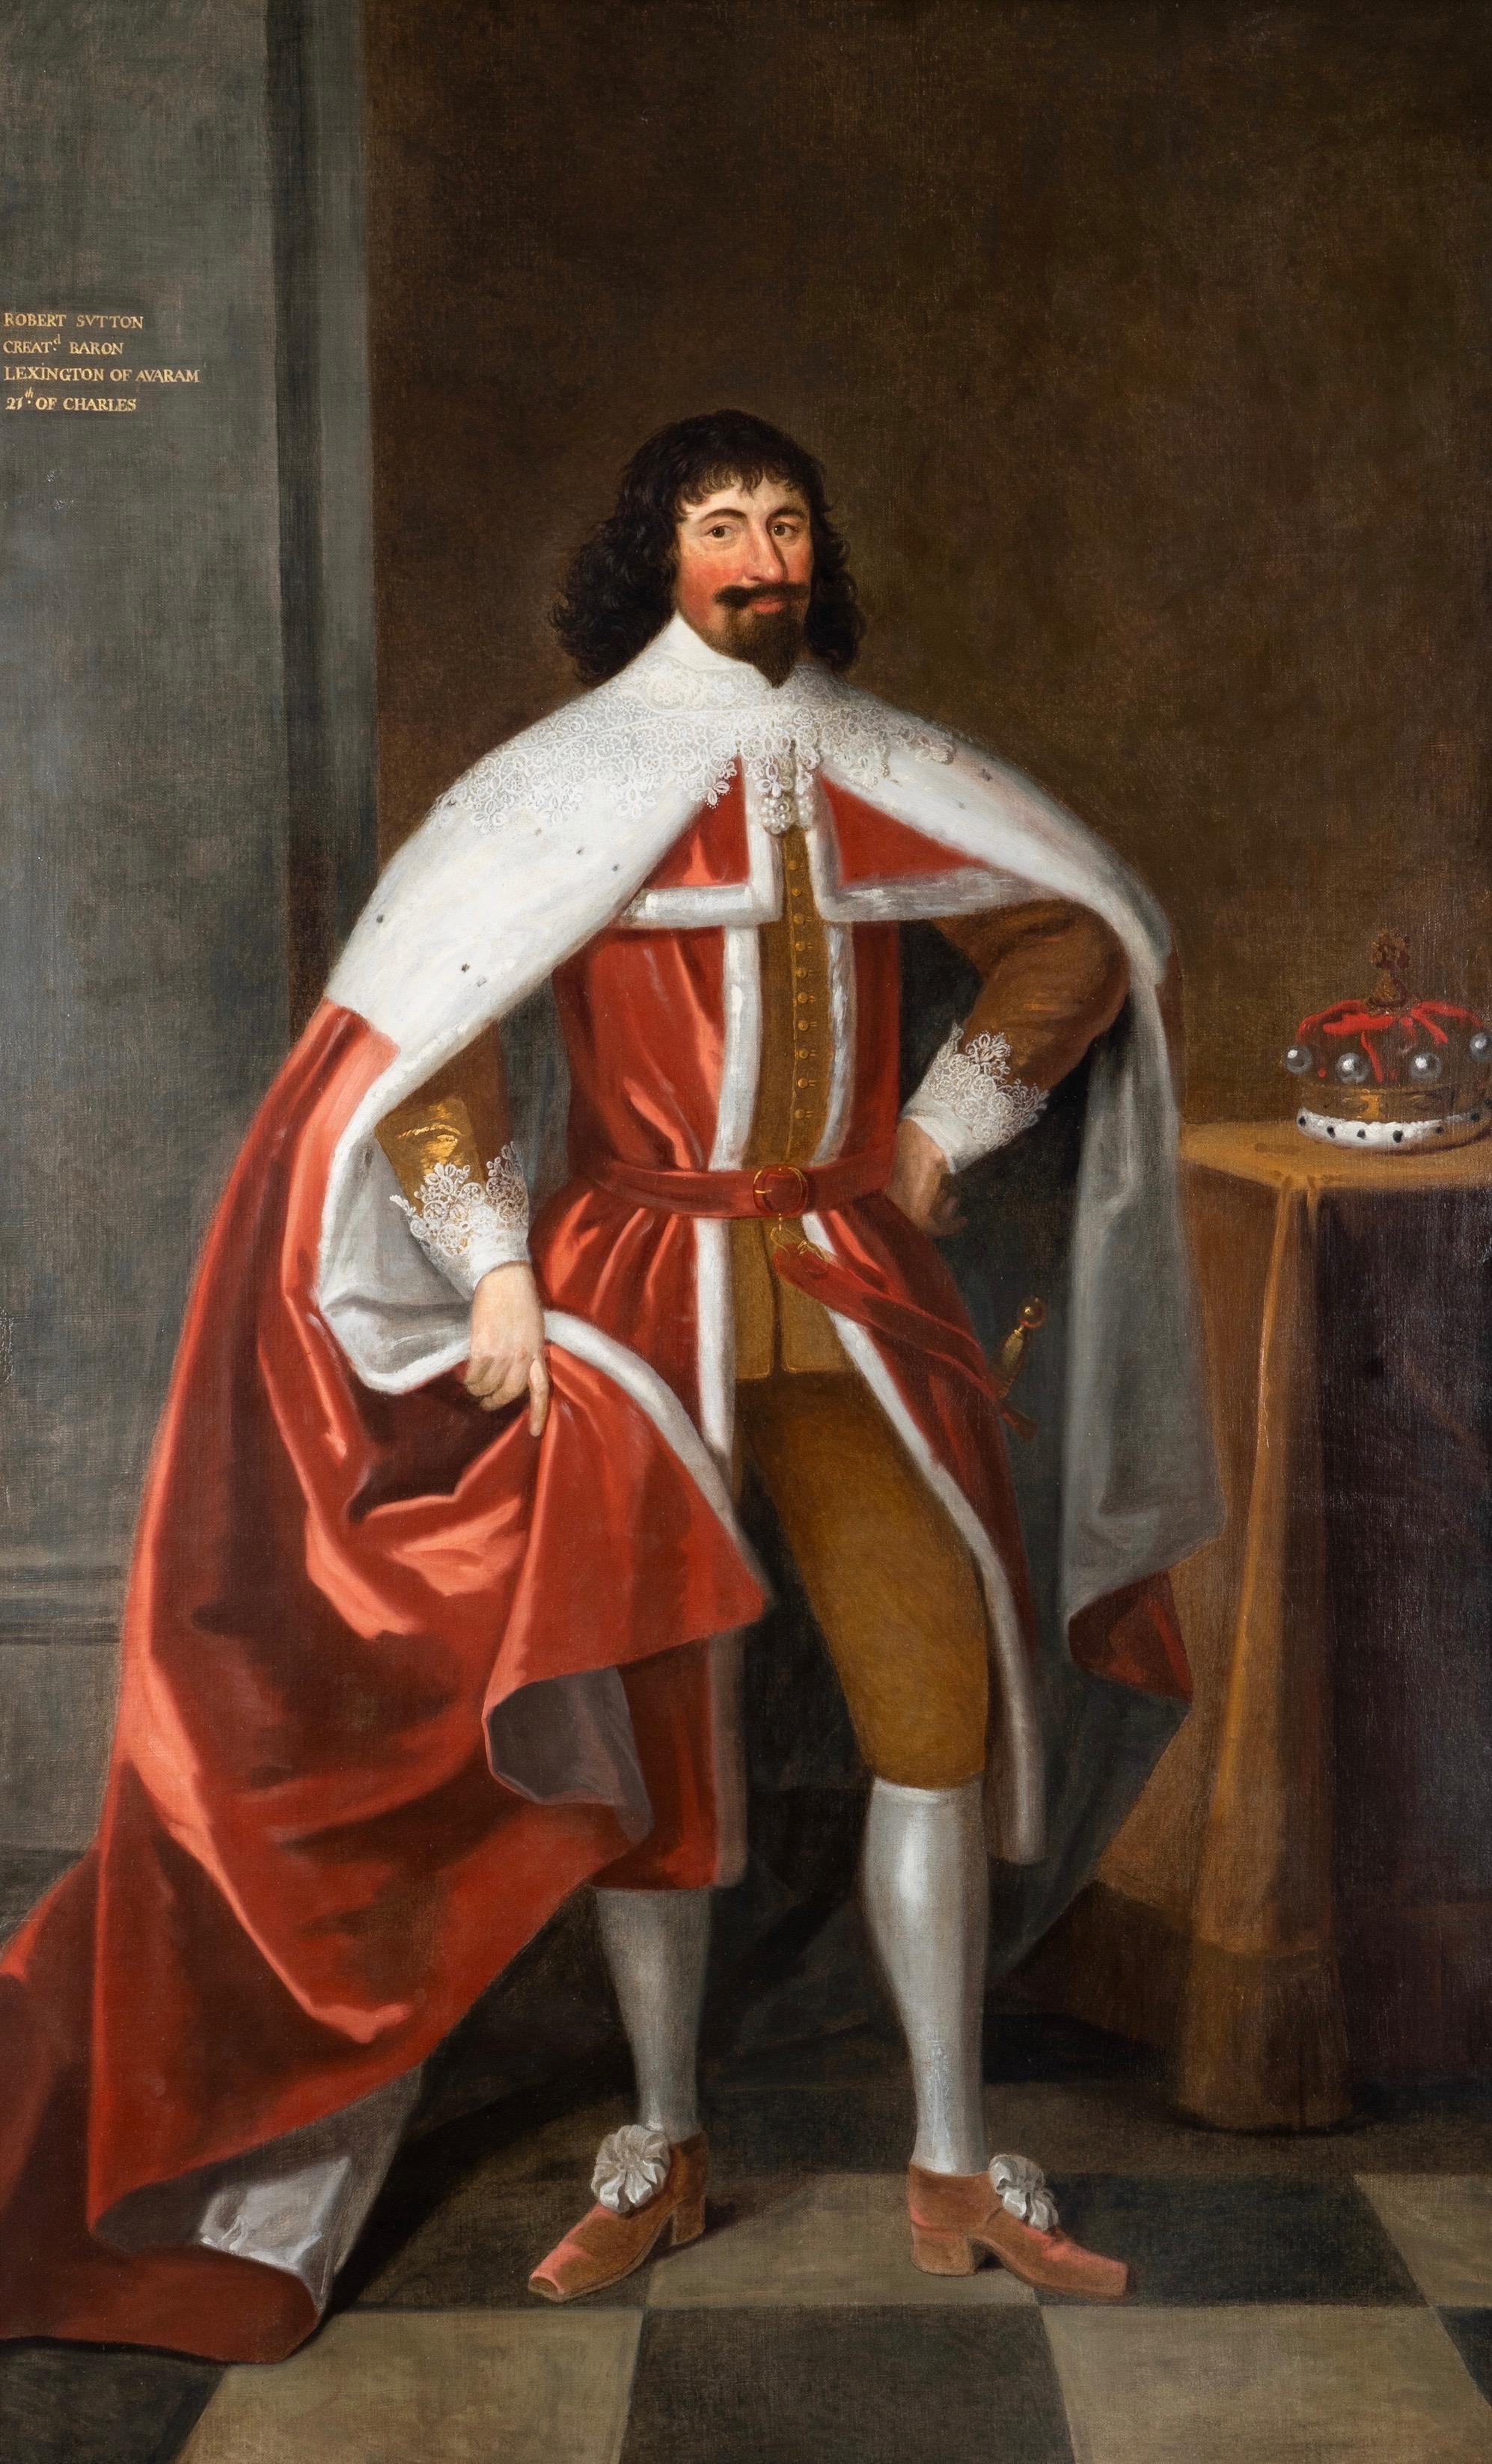 Unknown Interior Painting - Enormous 17th Century British Portrait of Baron Lexington in Red Peers Robes 